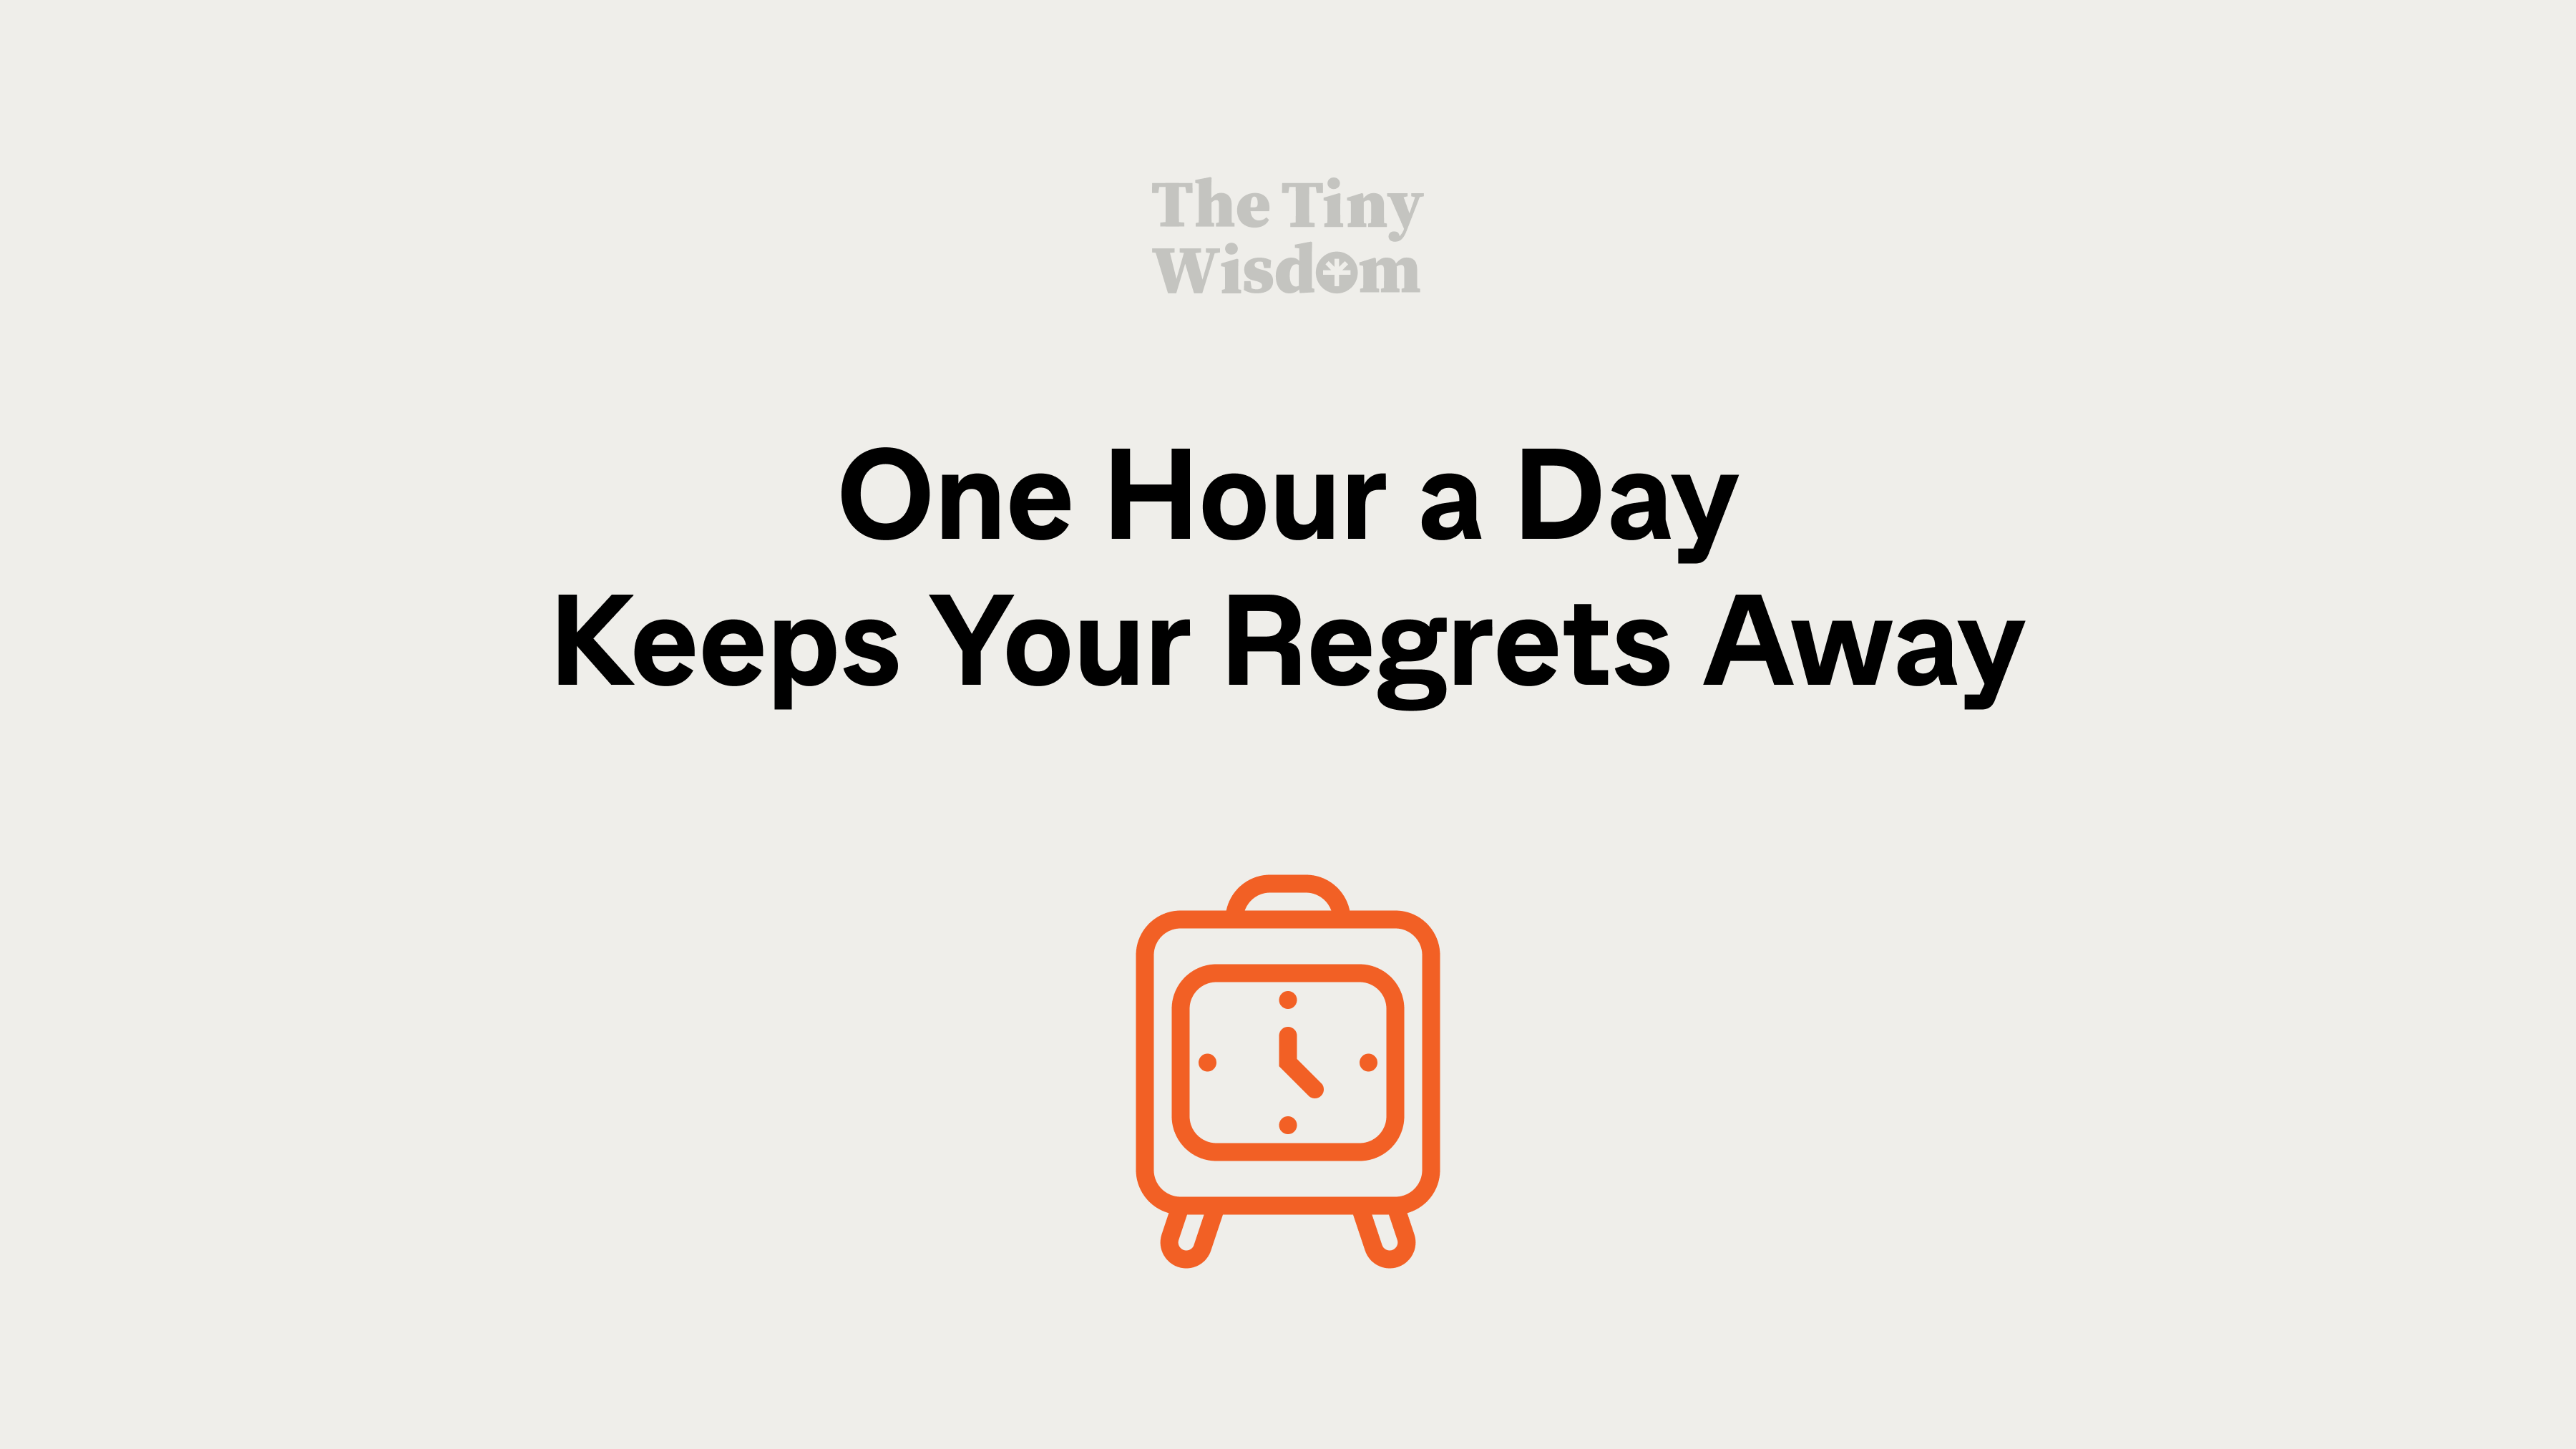 One hour a day keeps your regrets away